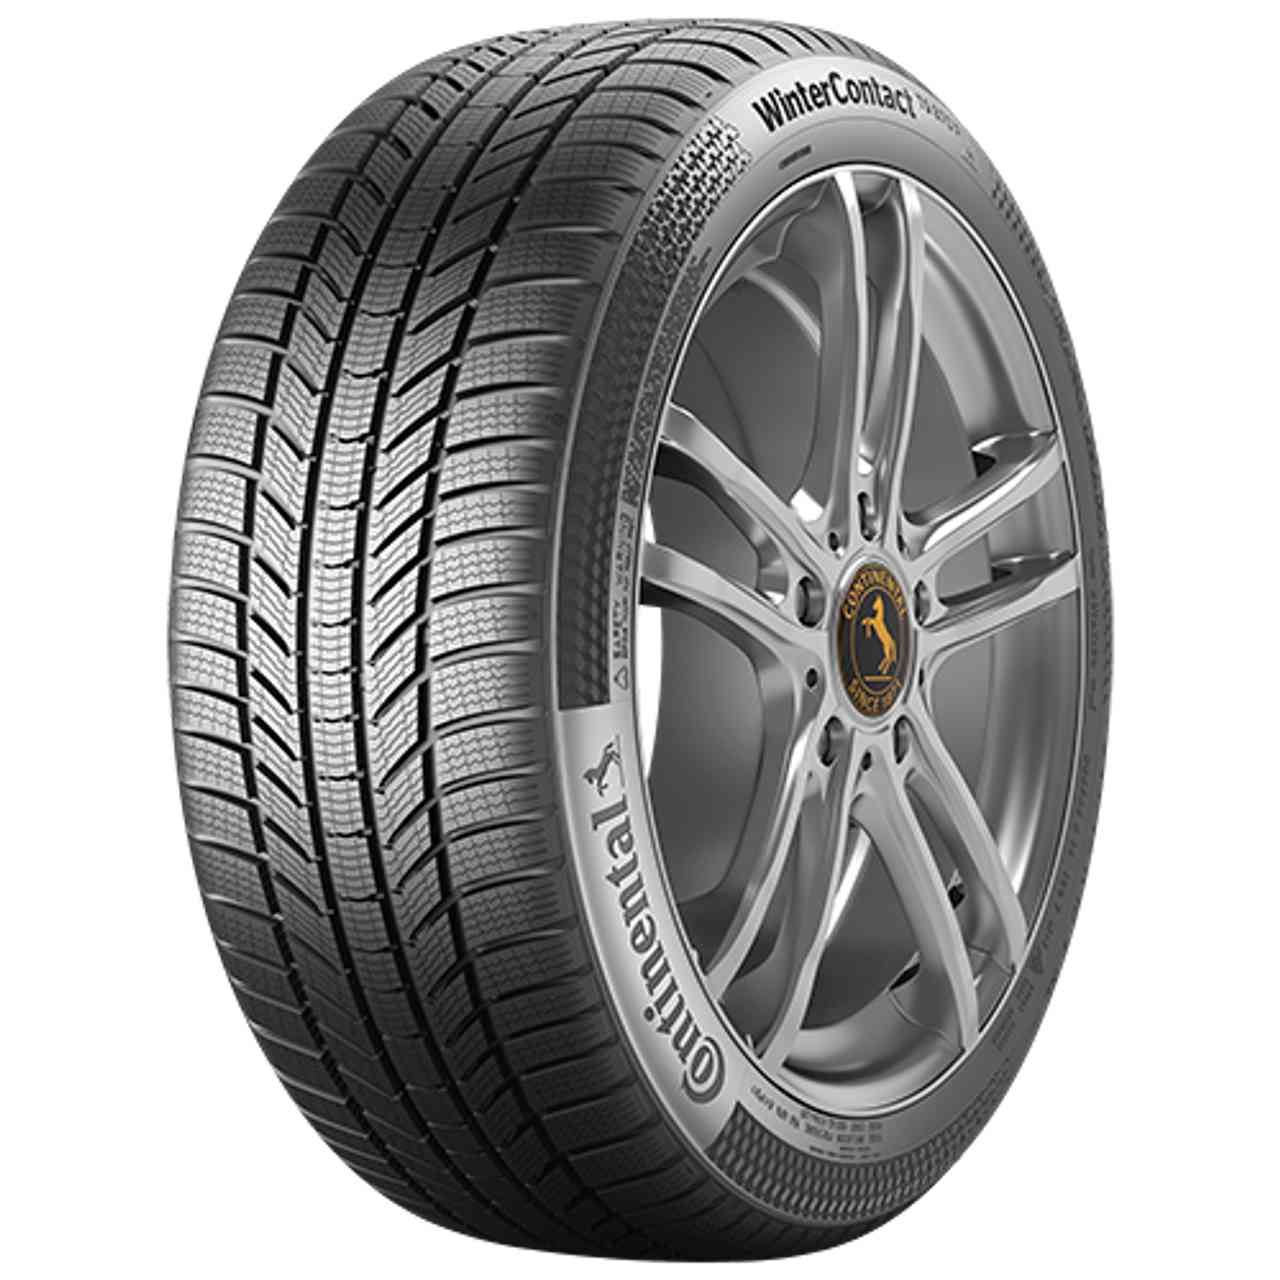 CONTINENTAL WINTERCONTACT TS 870 P (EVc) 215/55R17 98V BSW